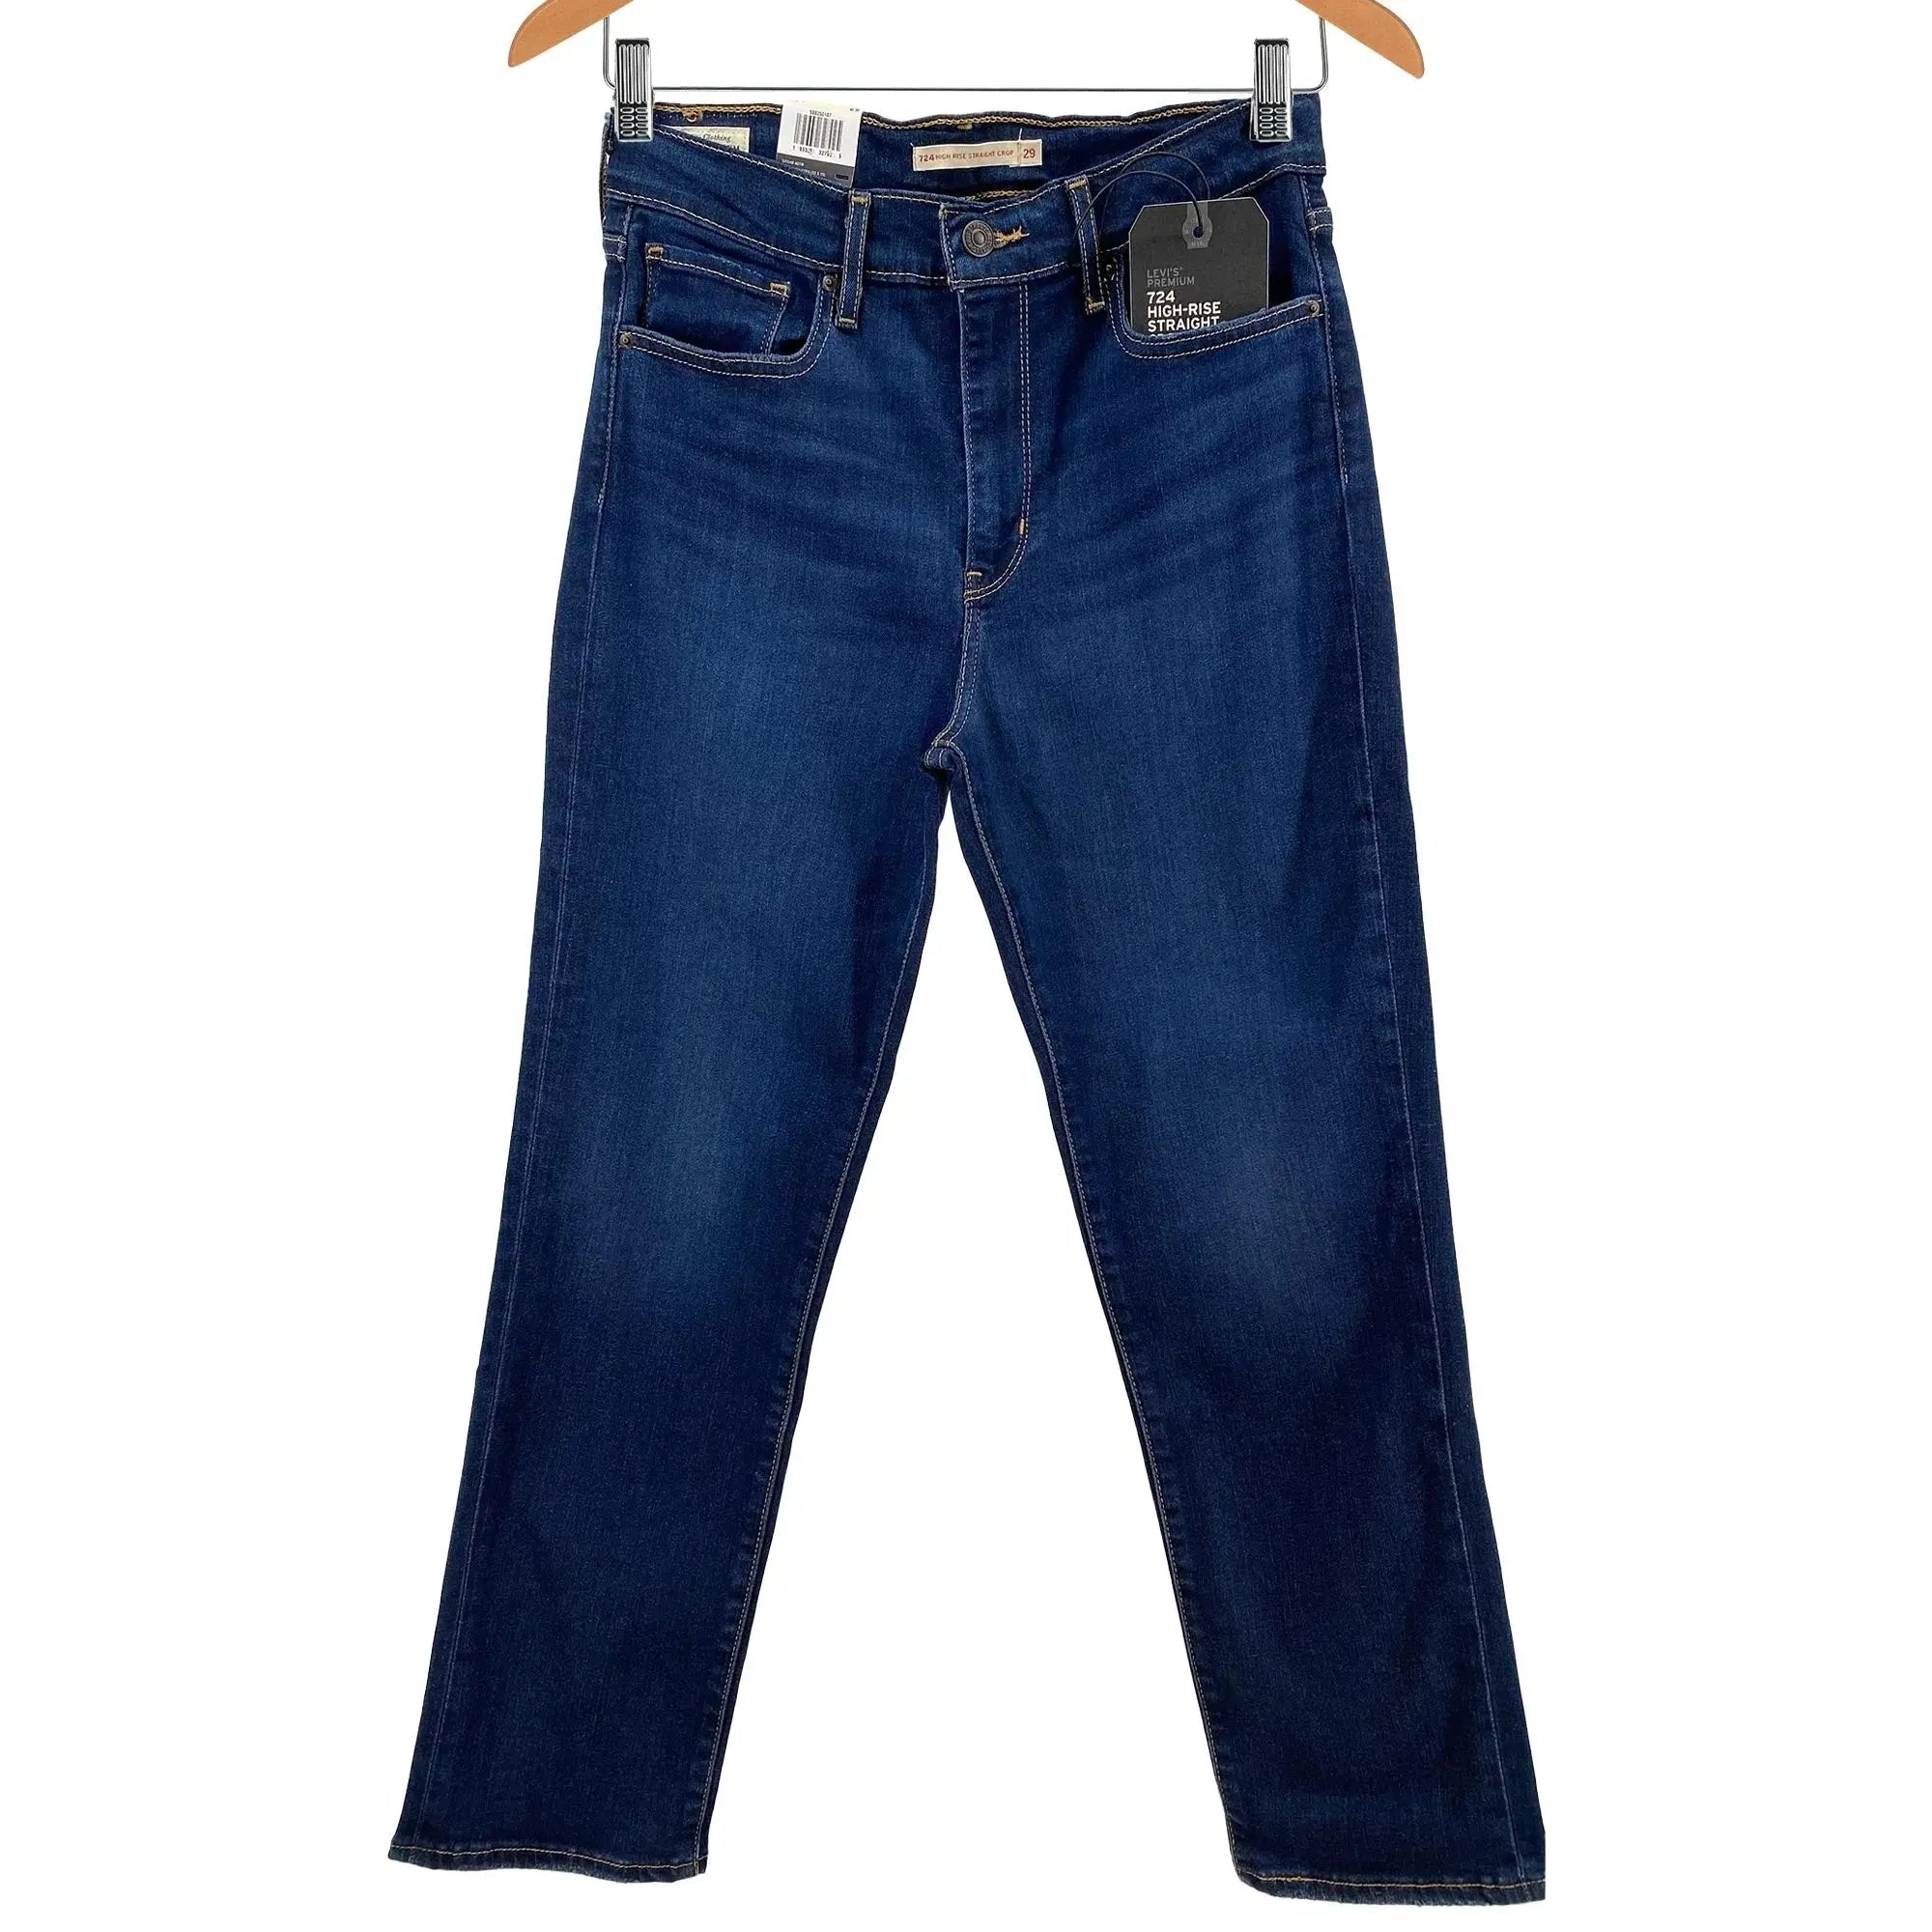 Levi's 724 High-Rise Straight Cropped - Women's - New with Tags Great Lakes Reclaimed Denim